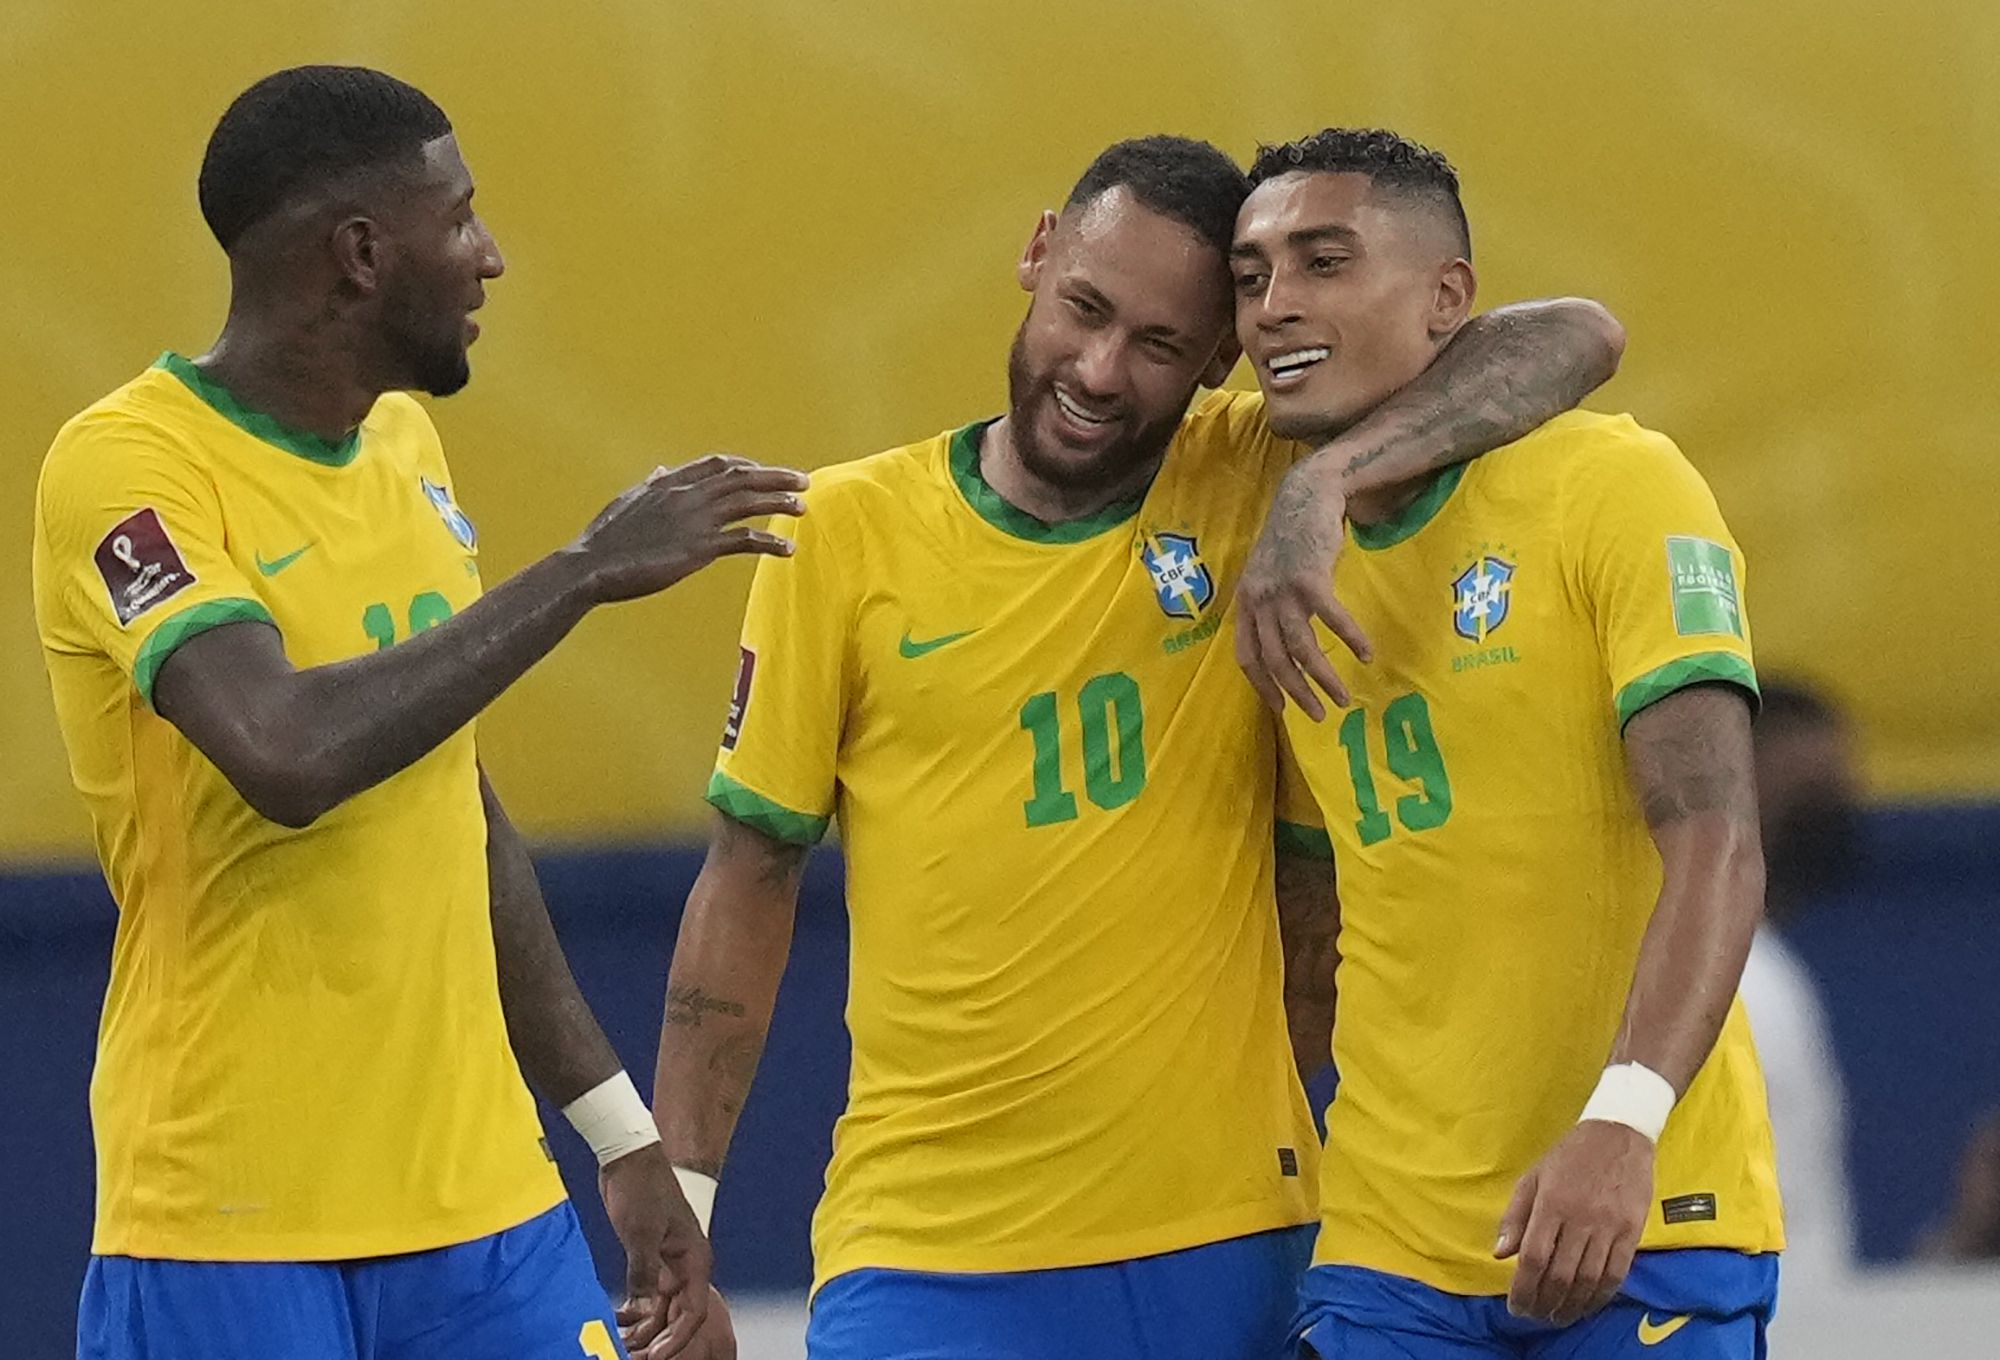 International Friendlies: Neymar set to start for Brazil in friendly against Japan, Magalhaes and Ederson to miss out, Follow Japan vs Brazil LIVE Streaming, Check Team News